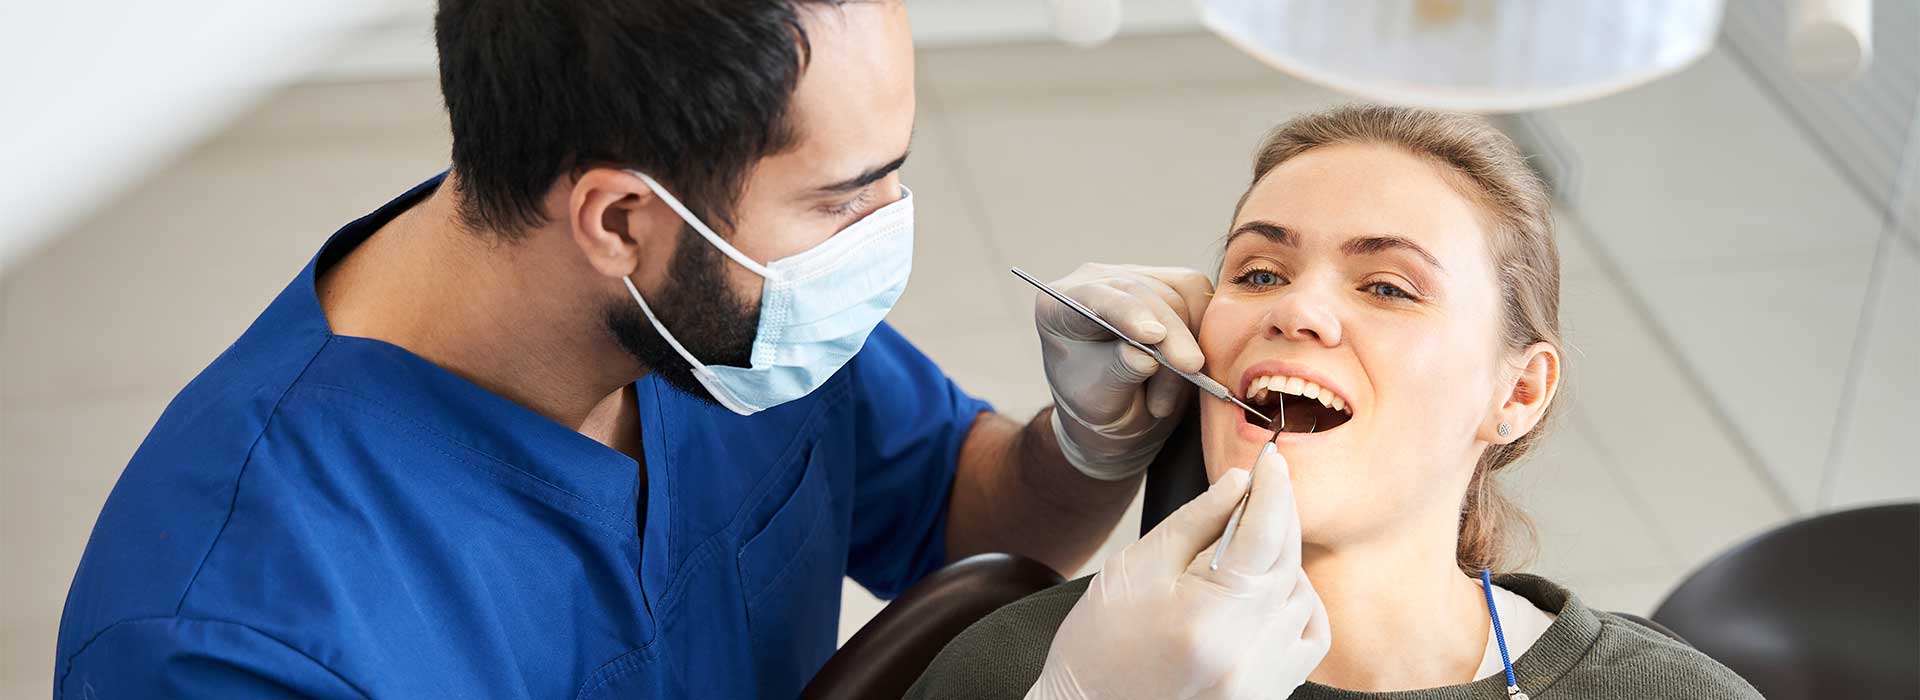 Dentist doing a emergency dental treatment for his patient